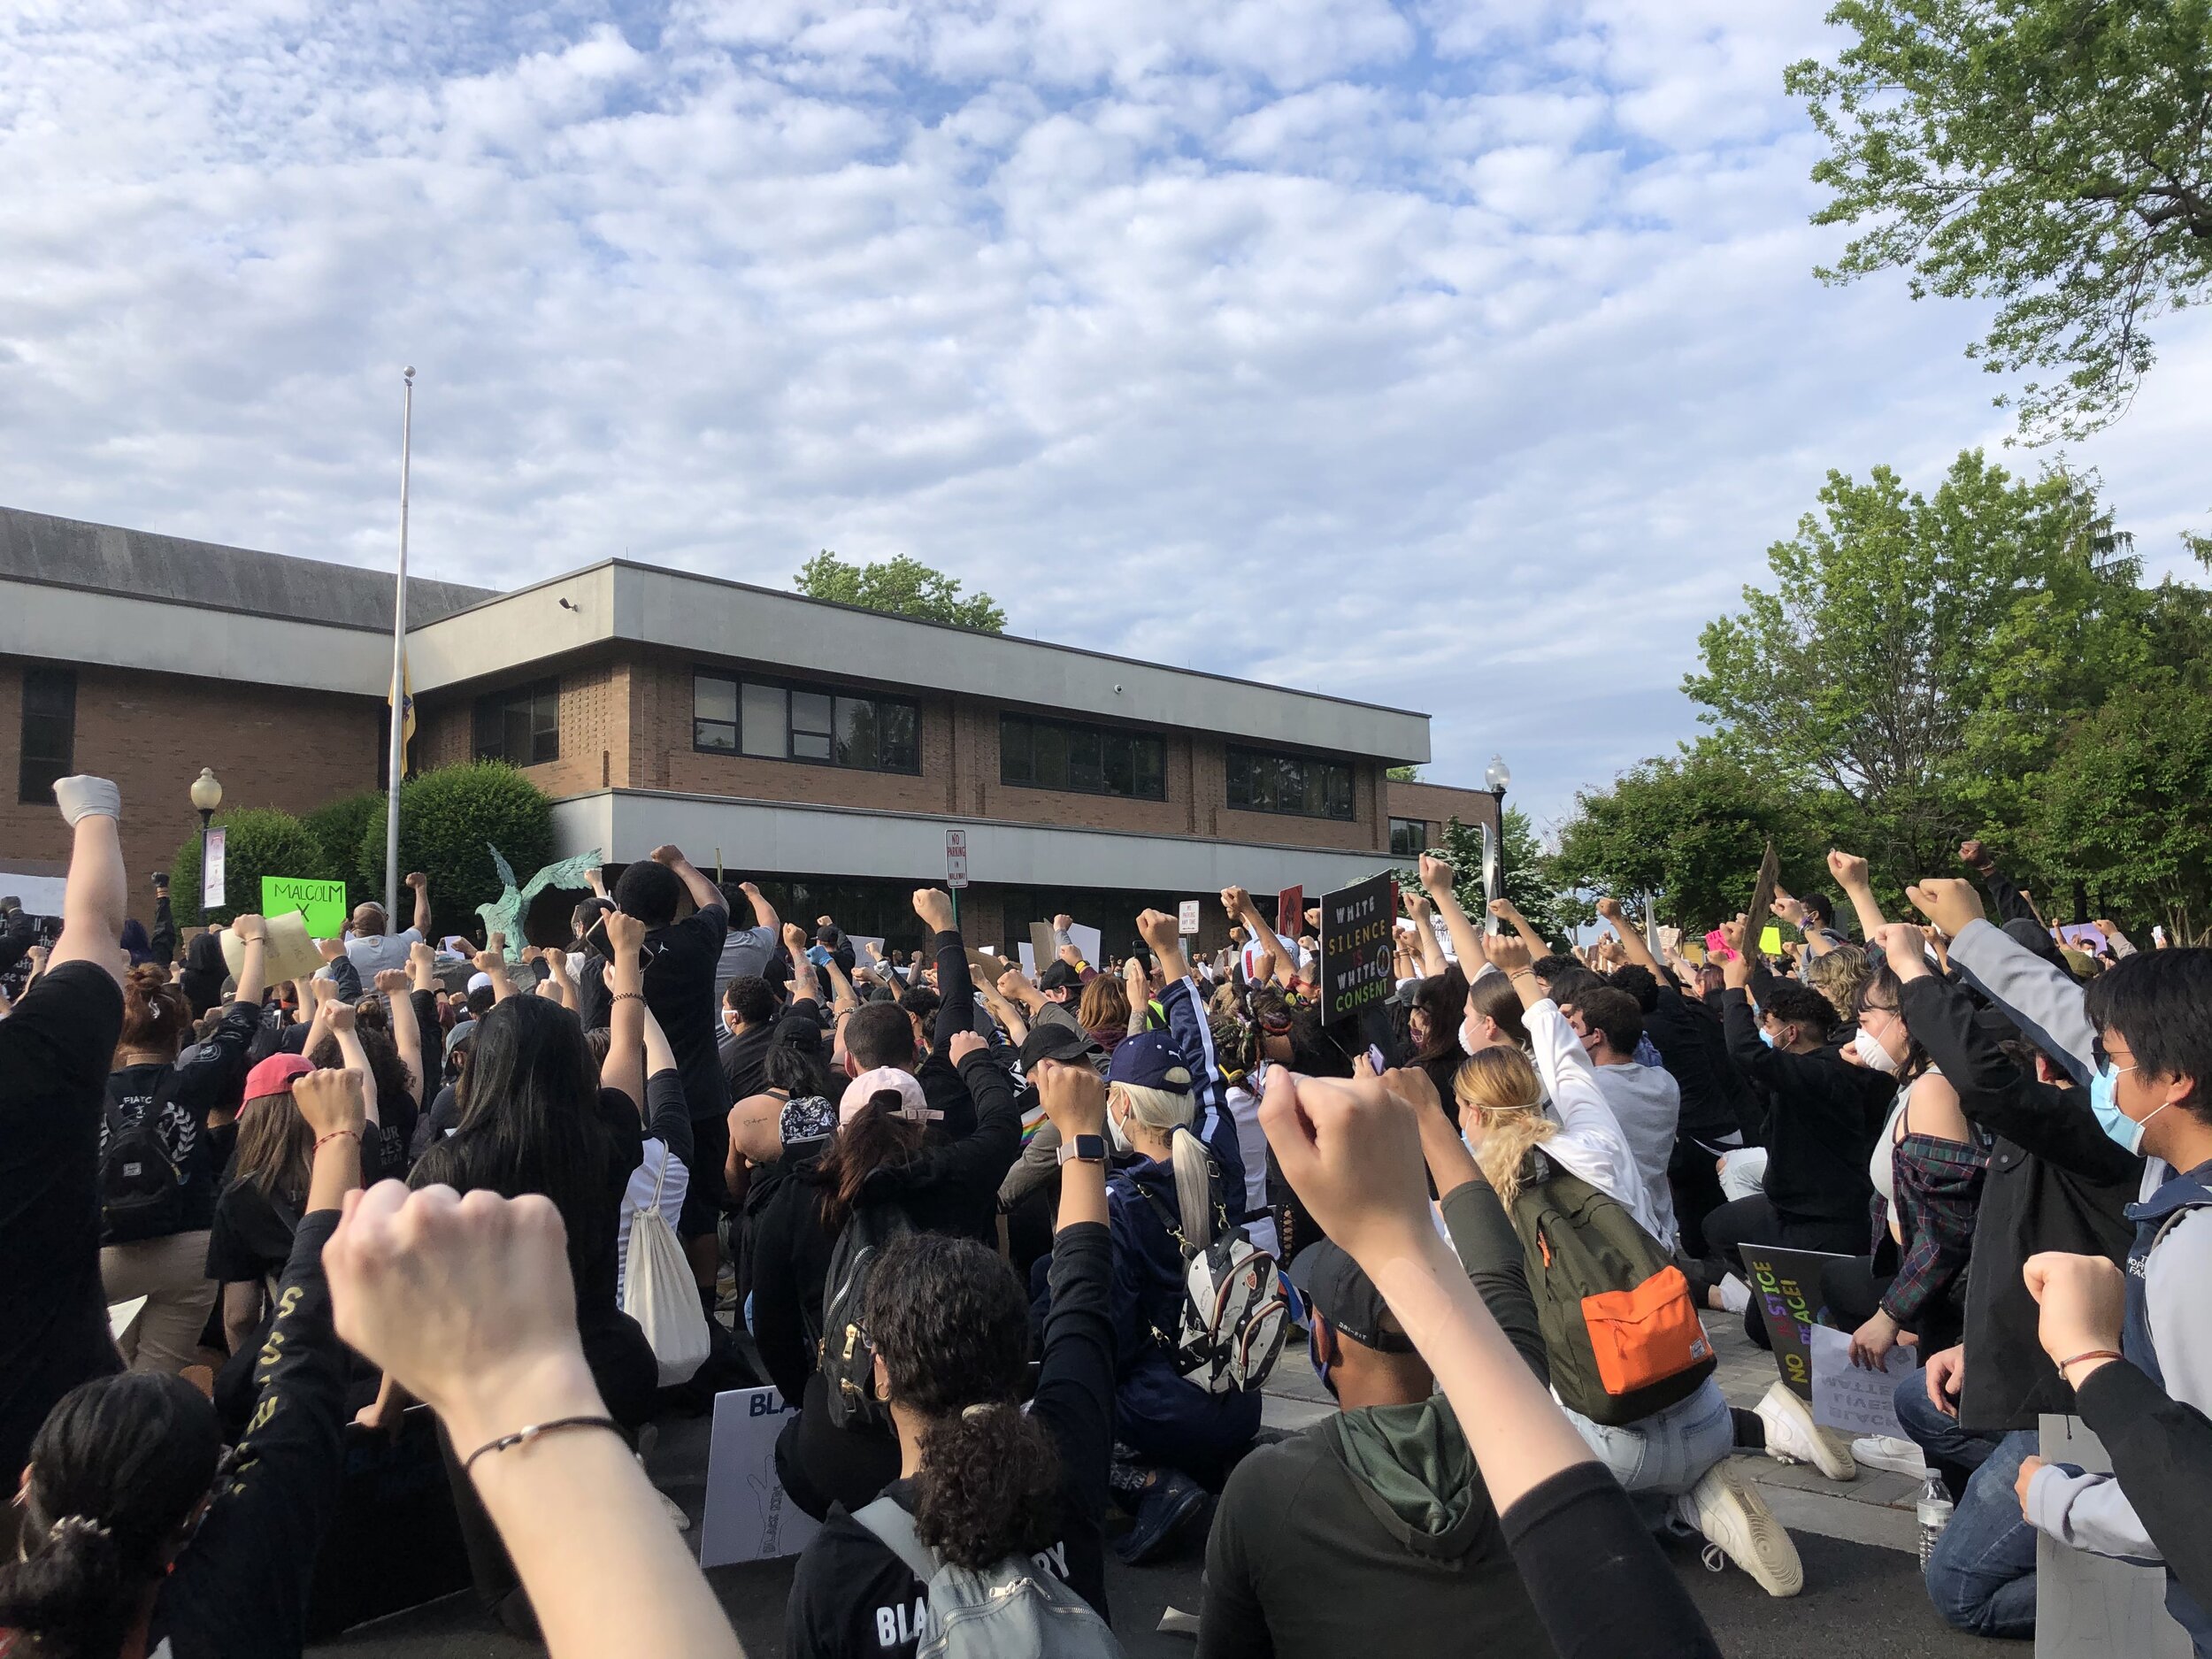  Protestors raised their fists, a symbol of solidarity, outside of City Hall in Clifton, New Jersey on Tuesday, June 2, 2020.  Photo by: Gab Varano  